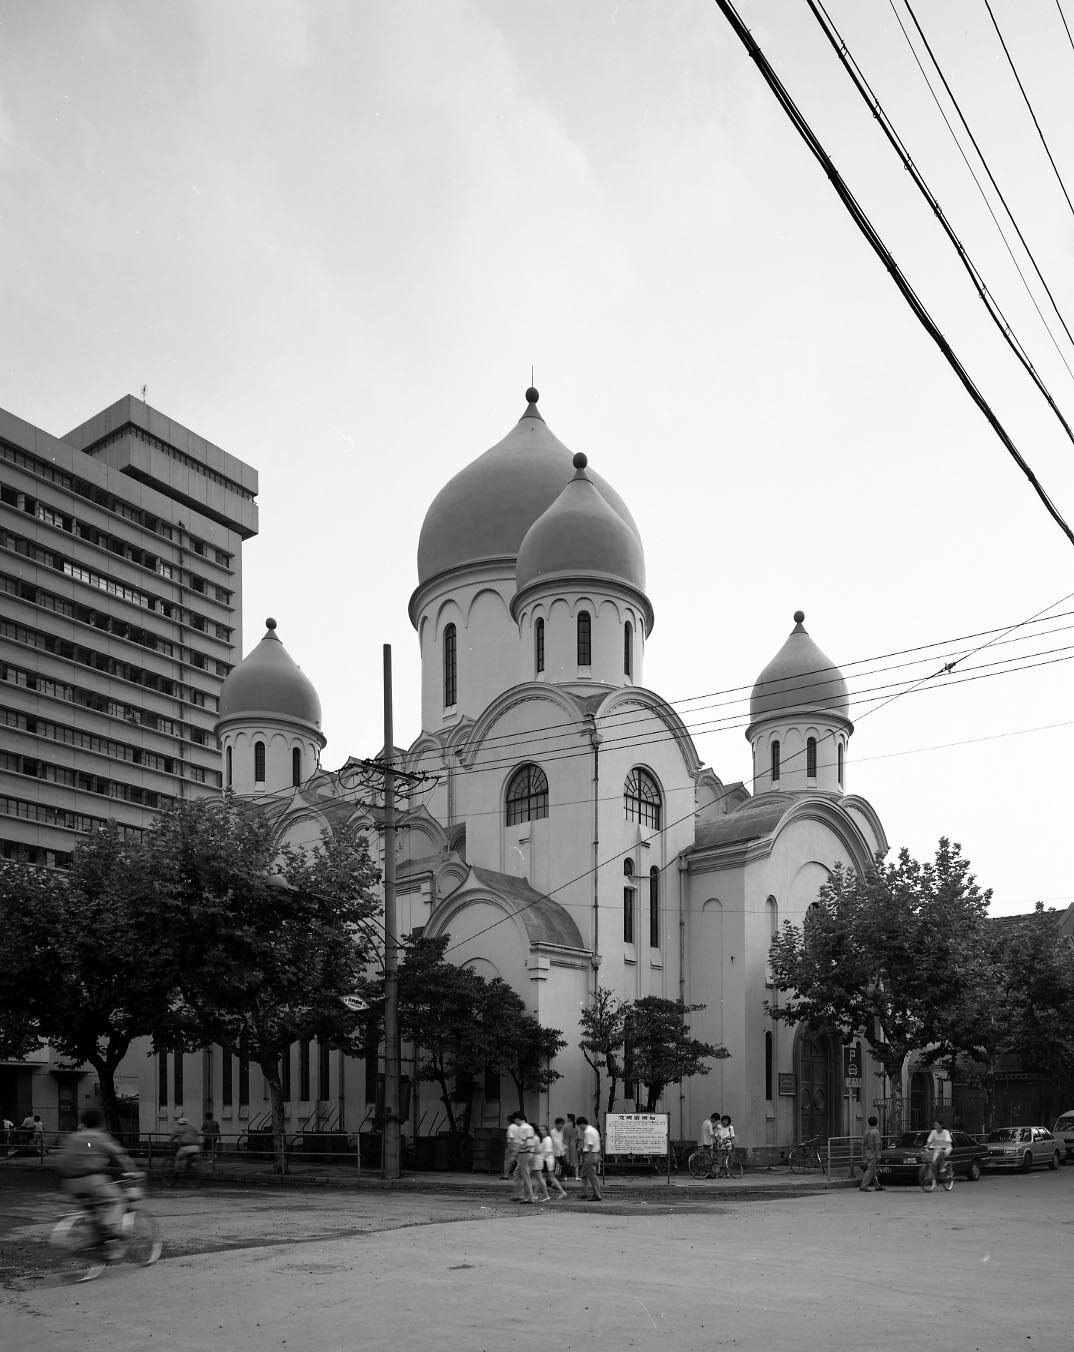 The Russian Orthodox Mission Church